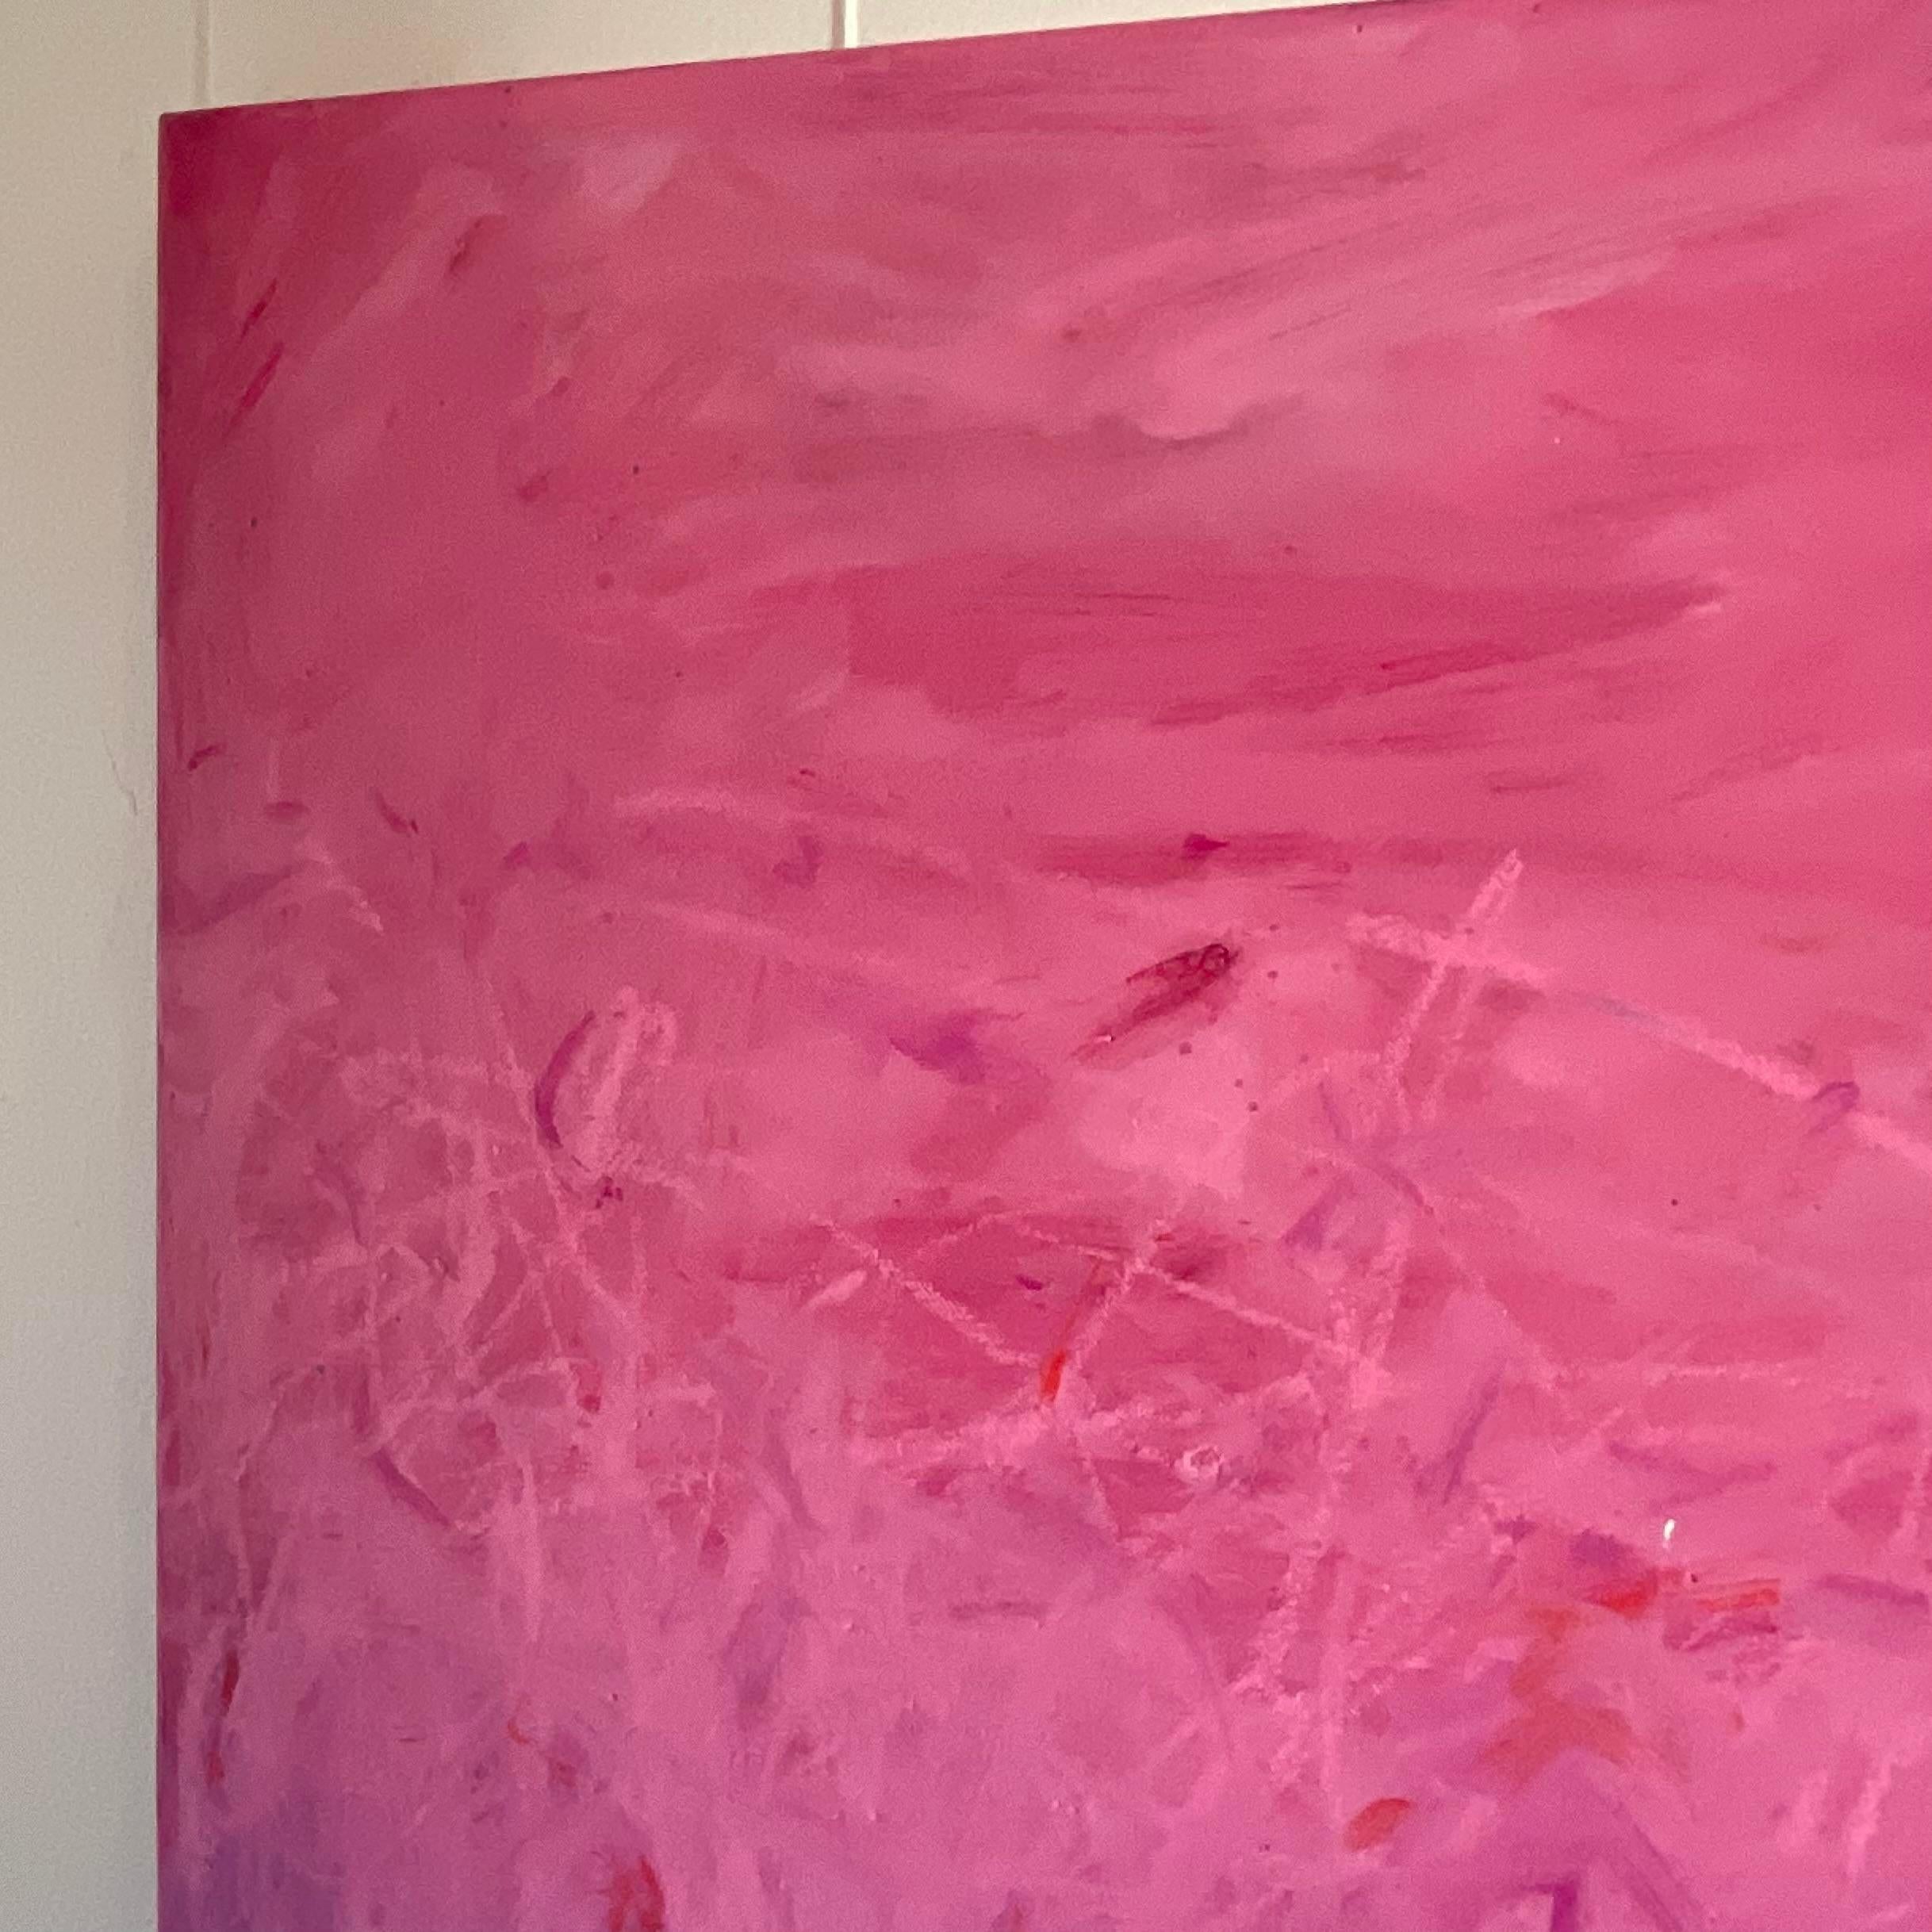 A stunning vintage Boho original oil painting on canvas. A chic Abstract composition in brilliant shades of pink and blue. Signed by the artist Schwartz. Acquired from a Palm Beach estate.